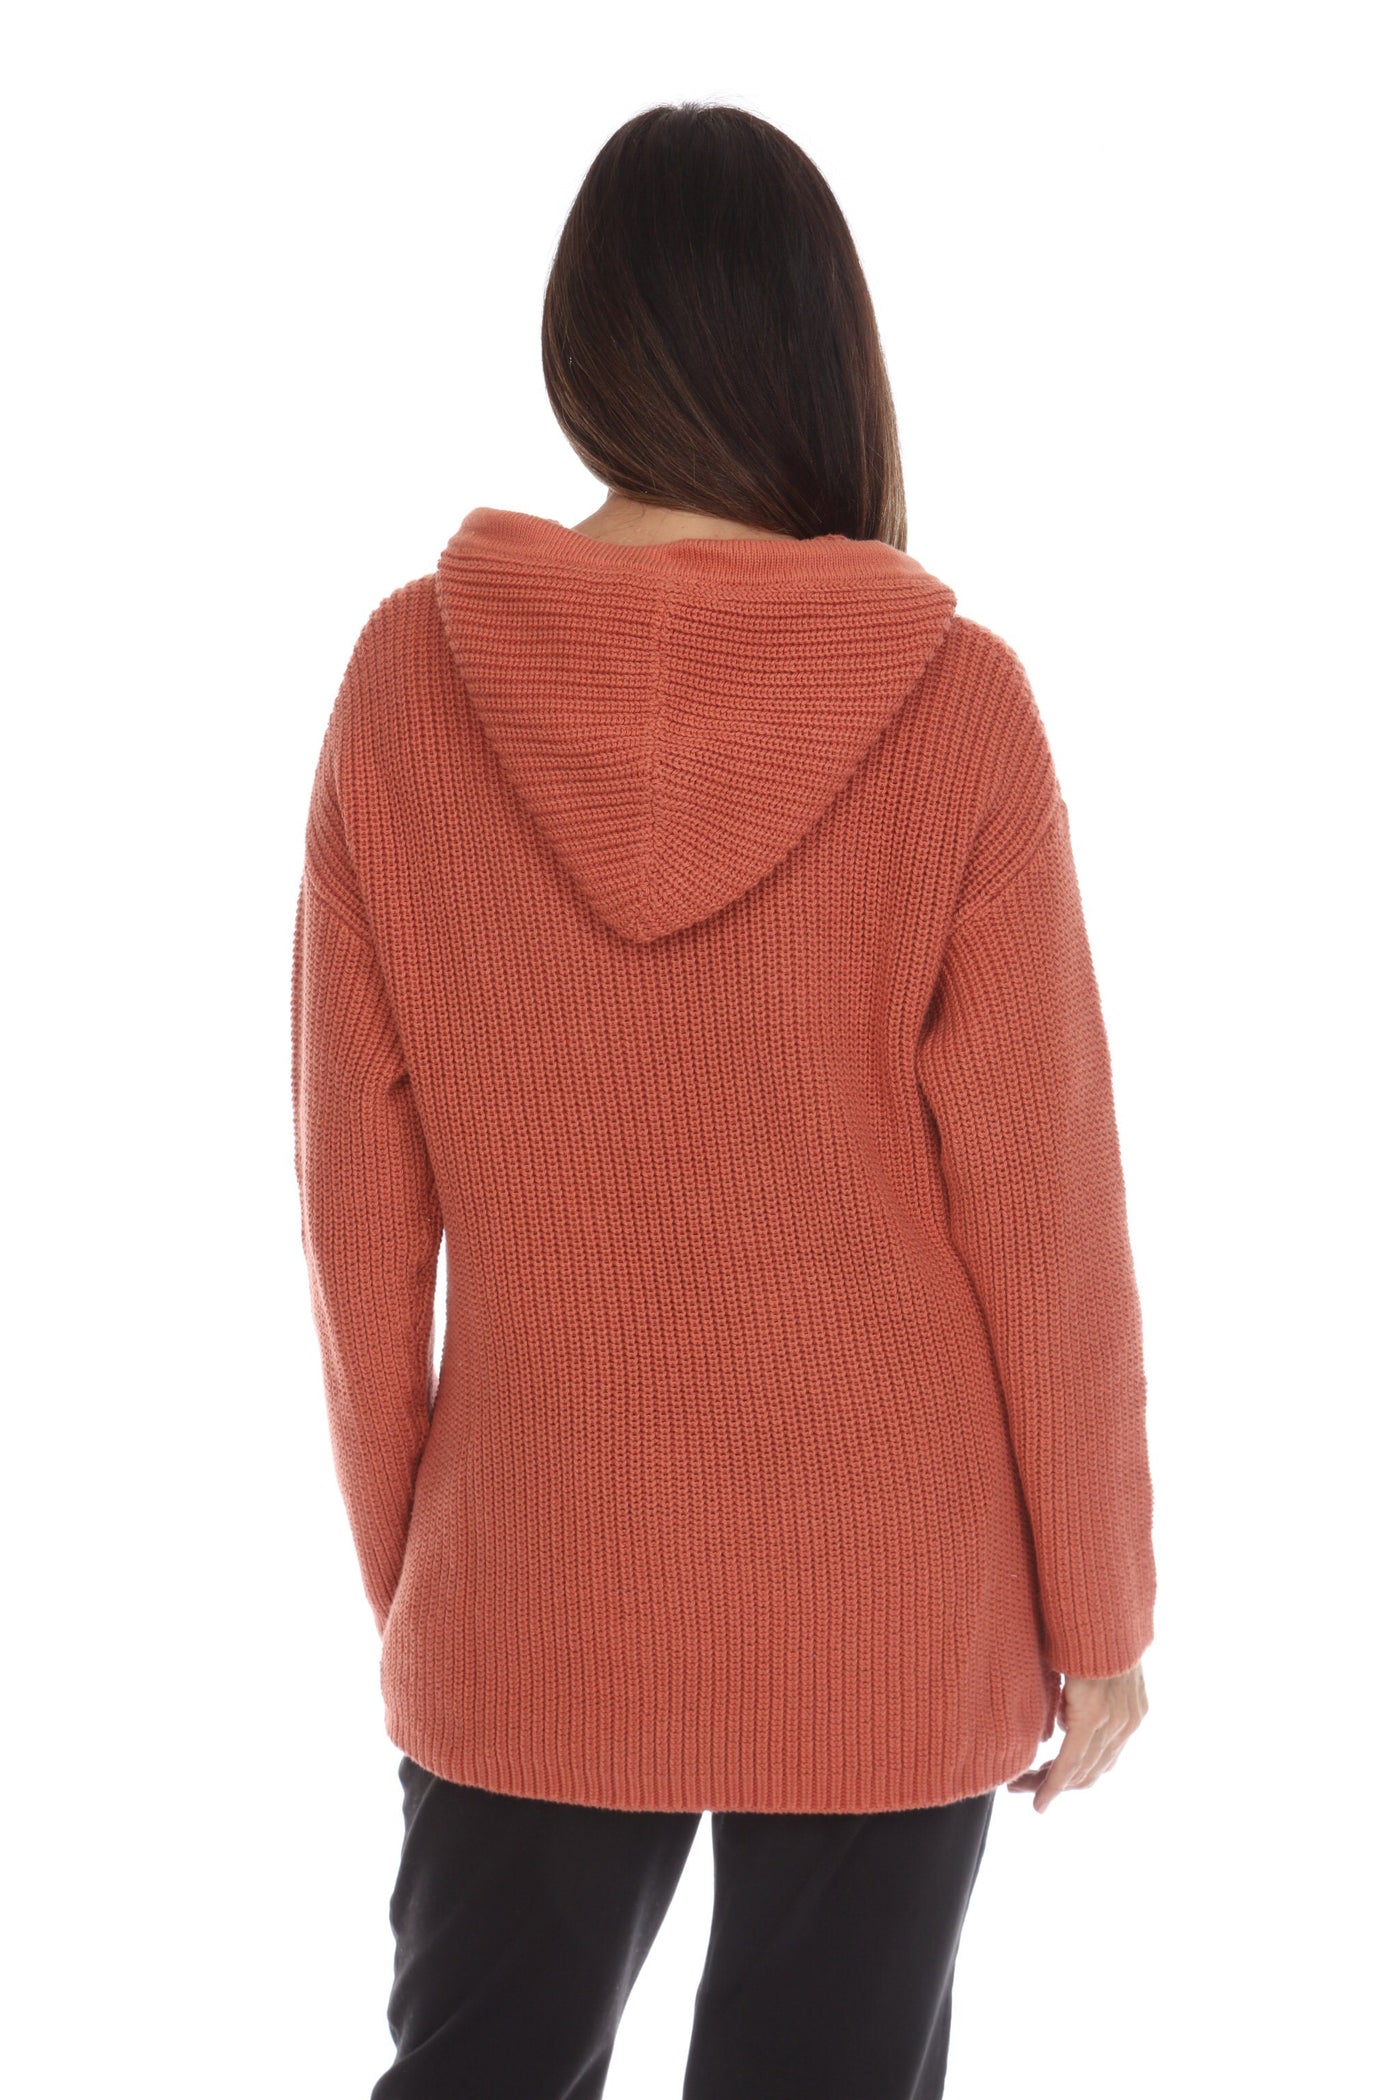 Neon Buddha Way Home Pullover Style 11903 